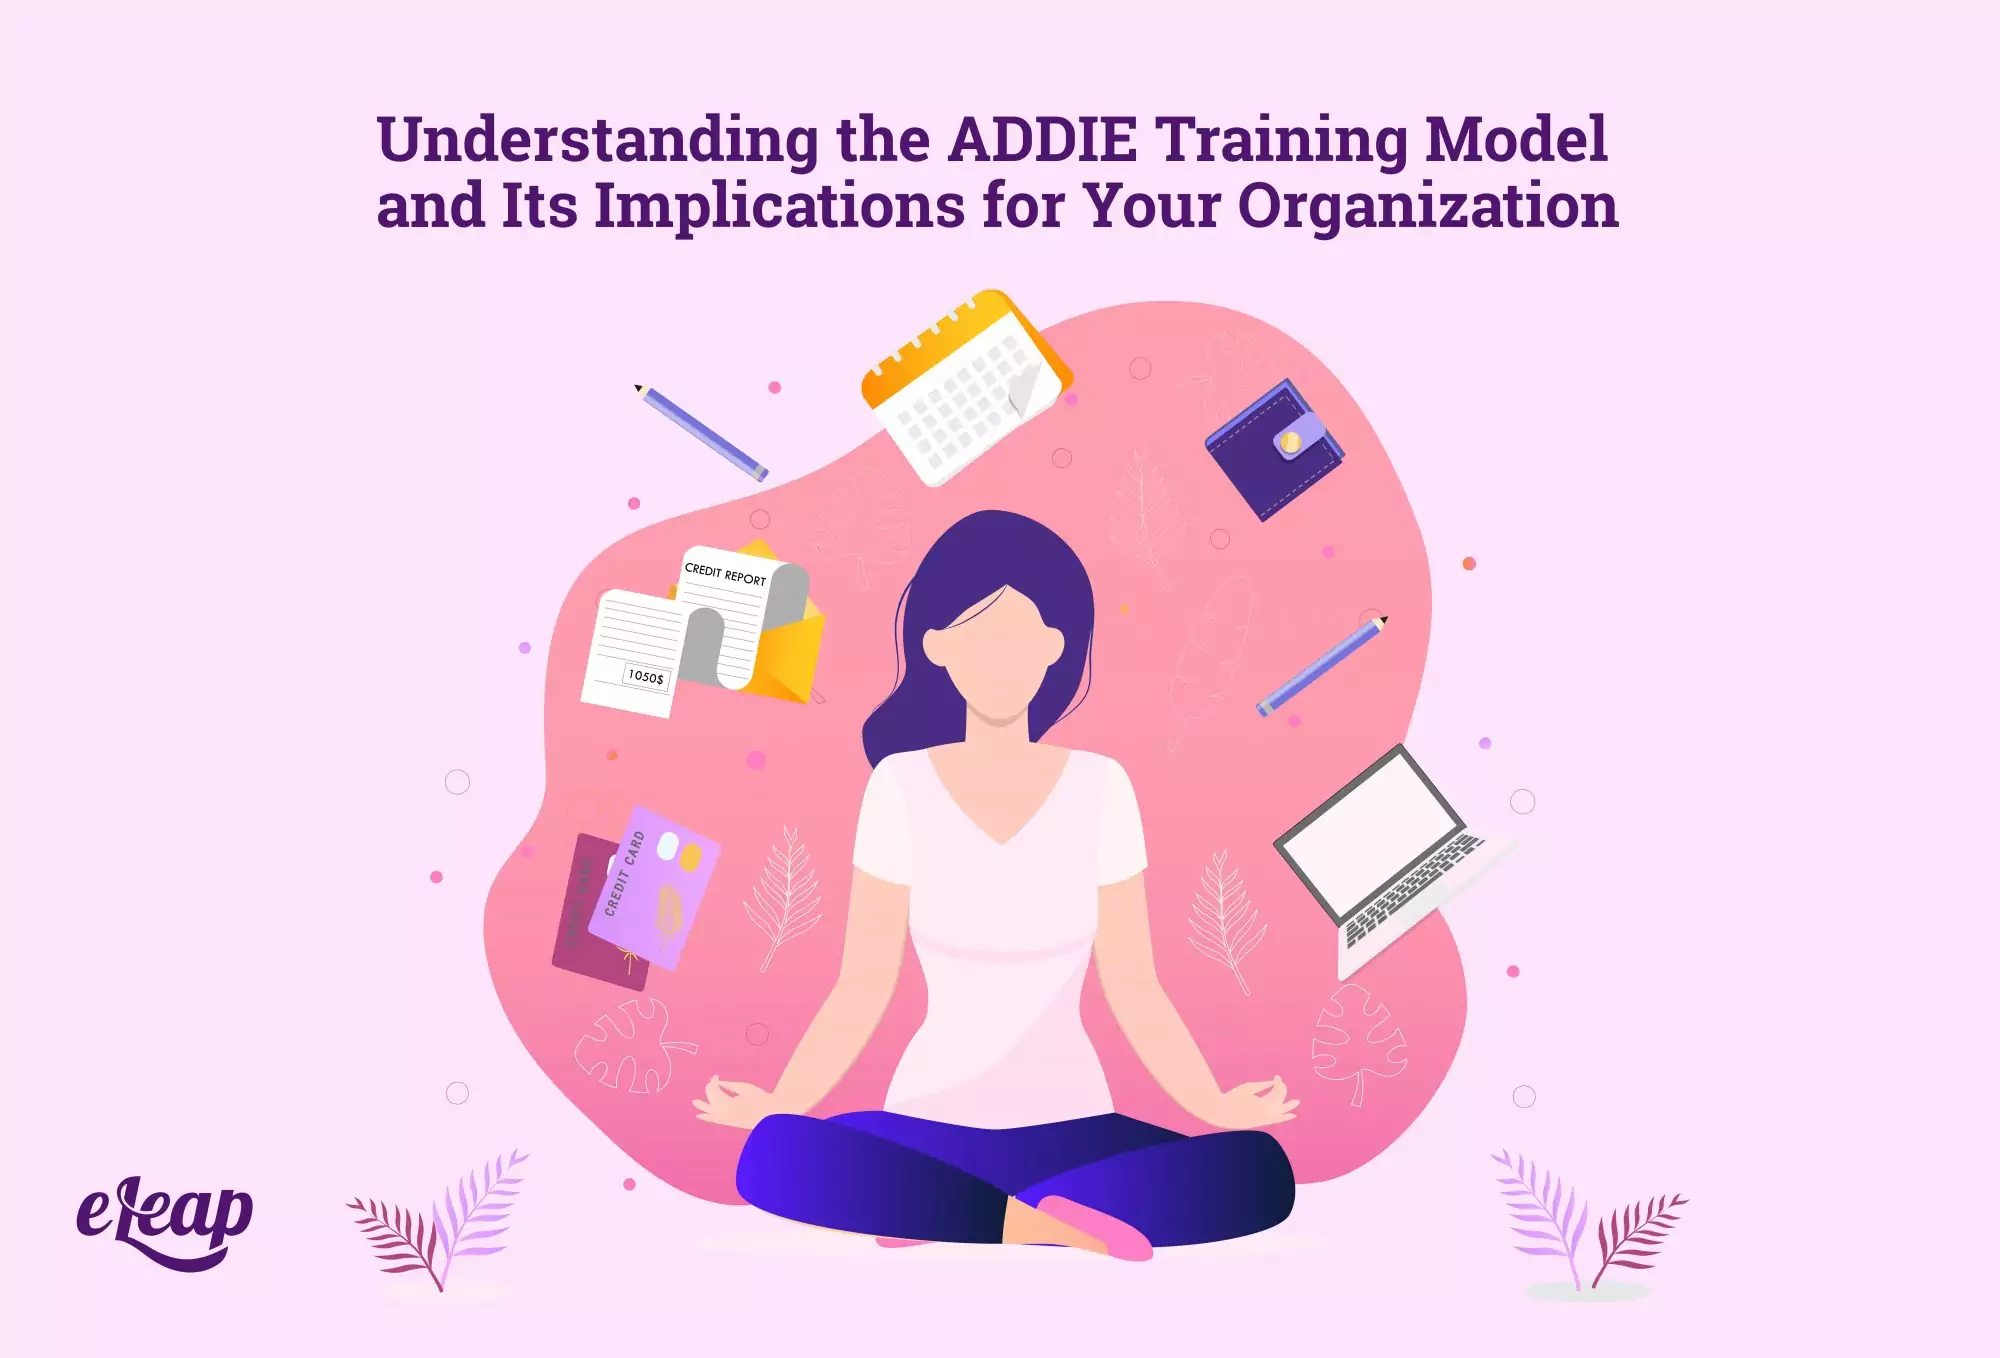 Understanding the ADDIE Training Model and Its Implications for Your Organization